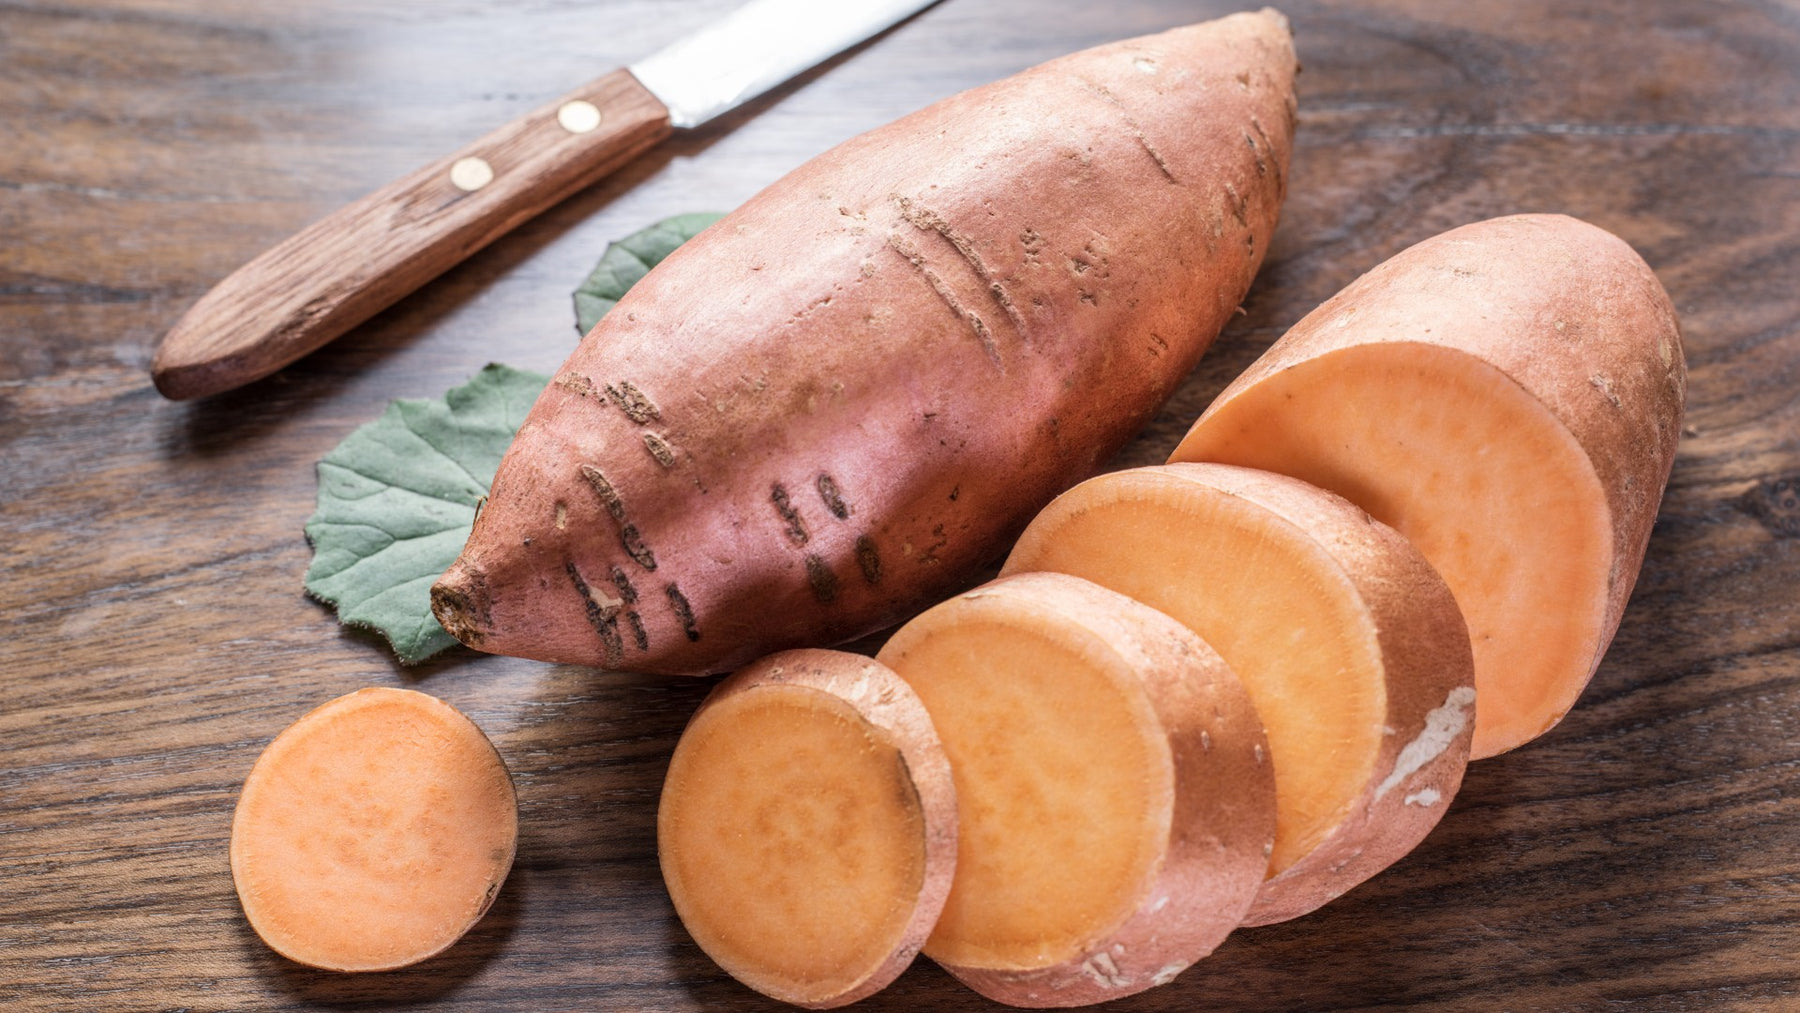 How Many Calories in a Sweet Potato?